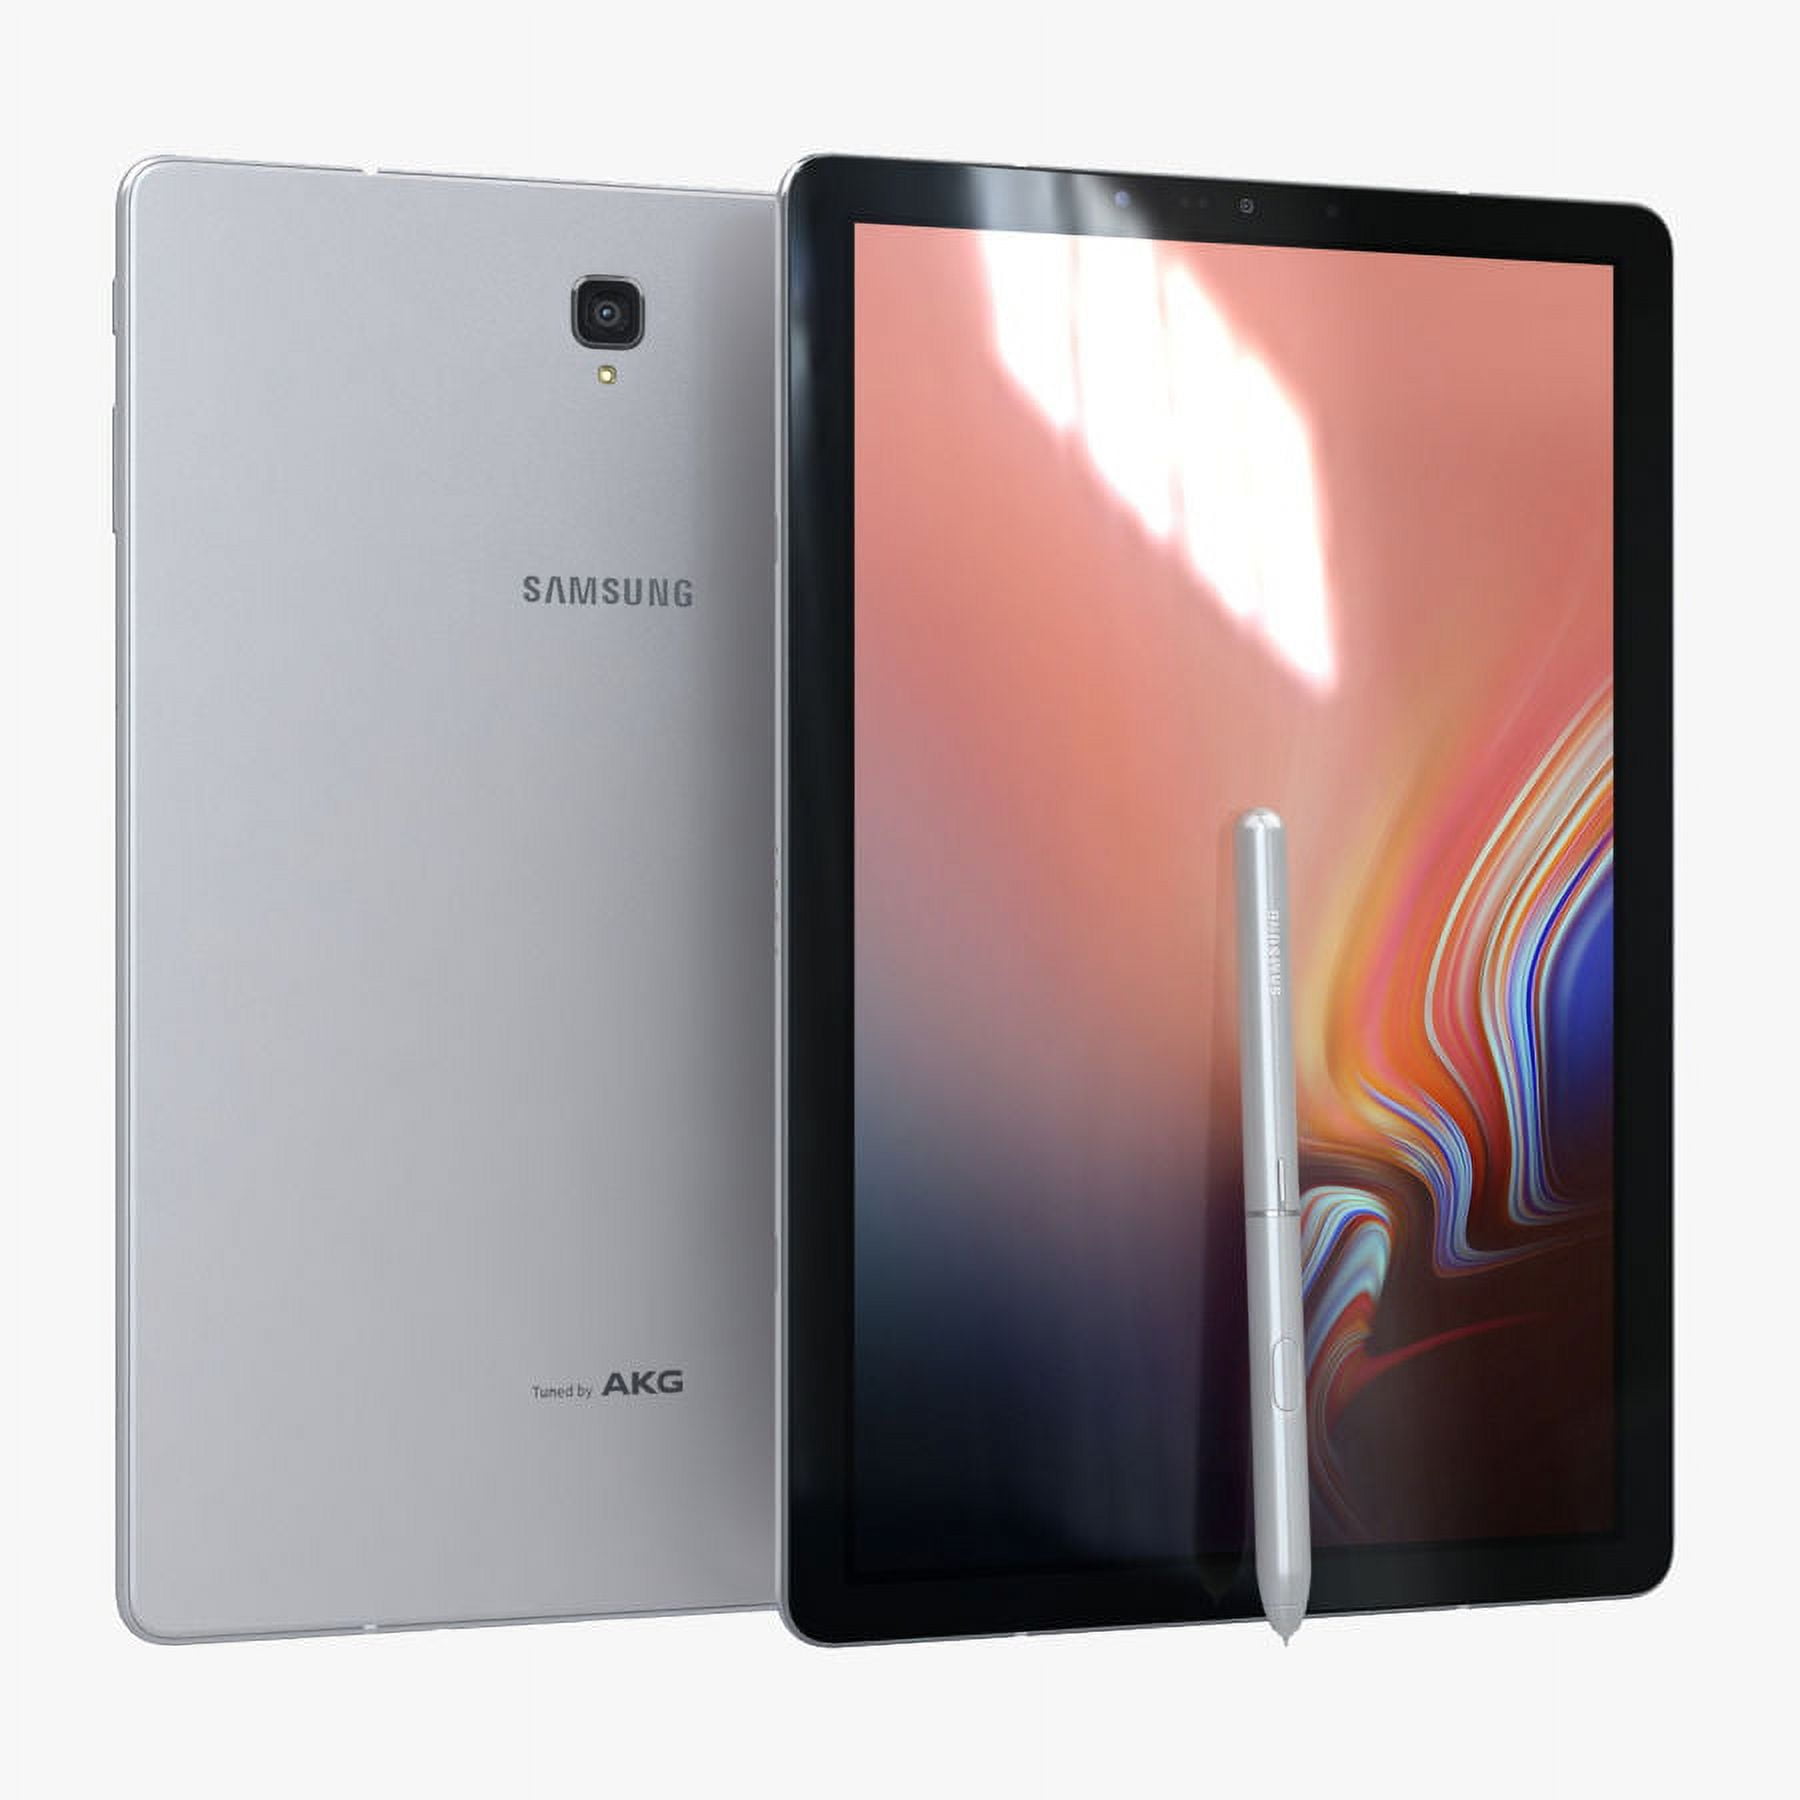 Tablette Samsung Galaxy Tab S 8.4'' Wifi 16G Blanc - Tablette tactile